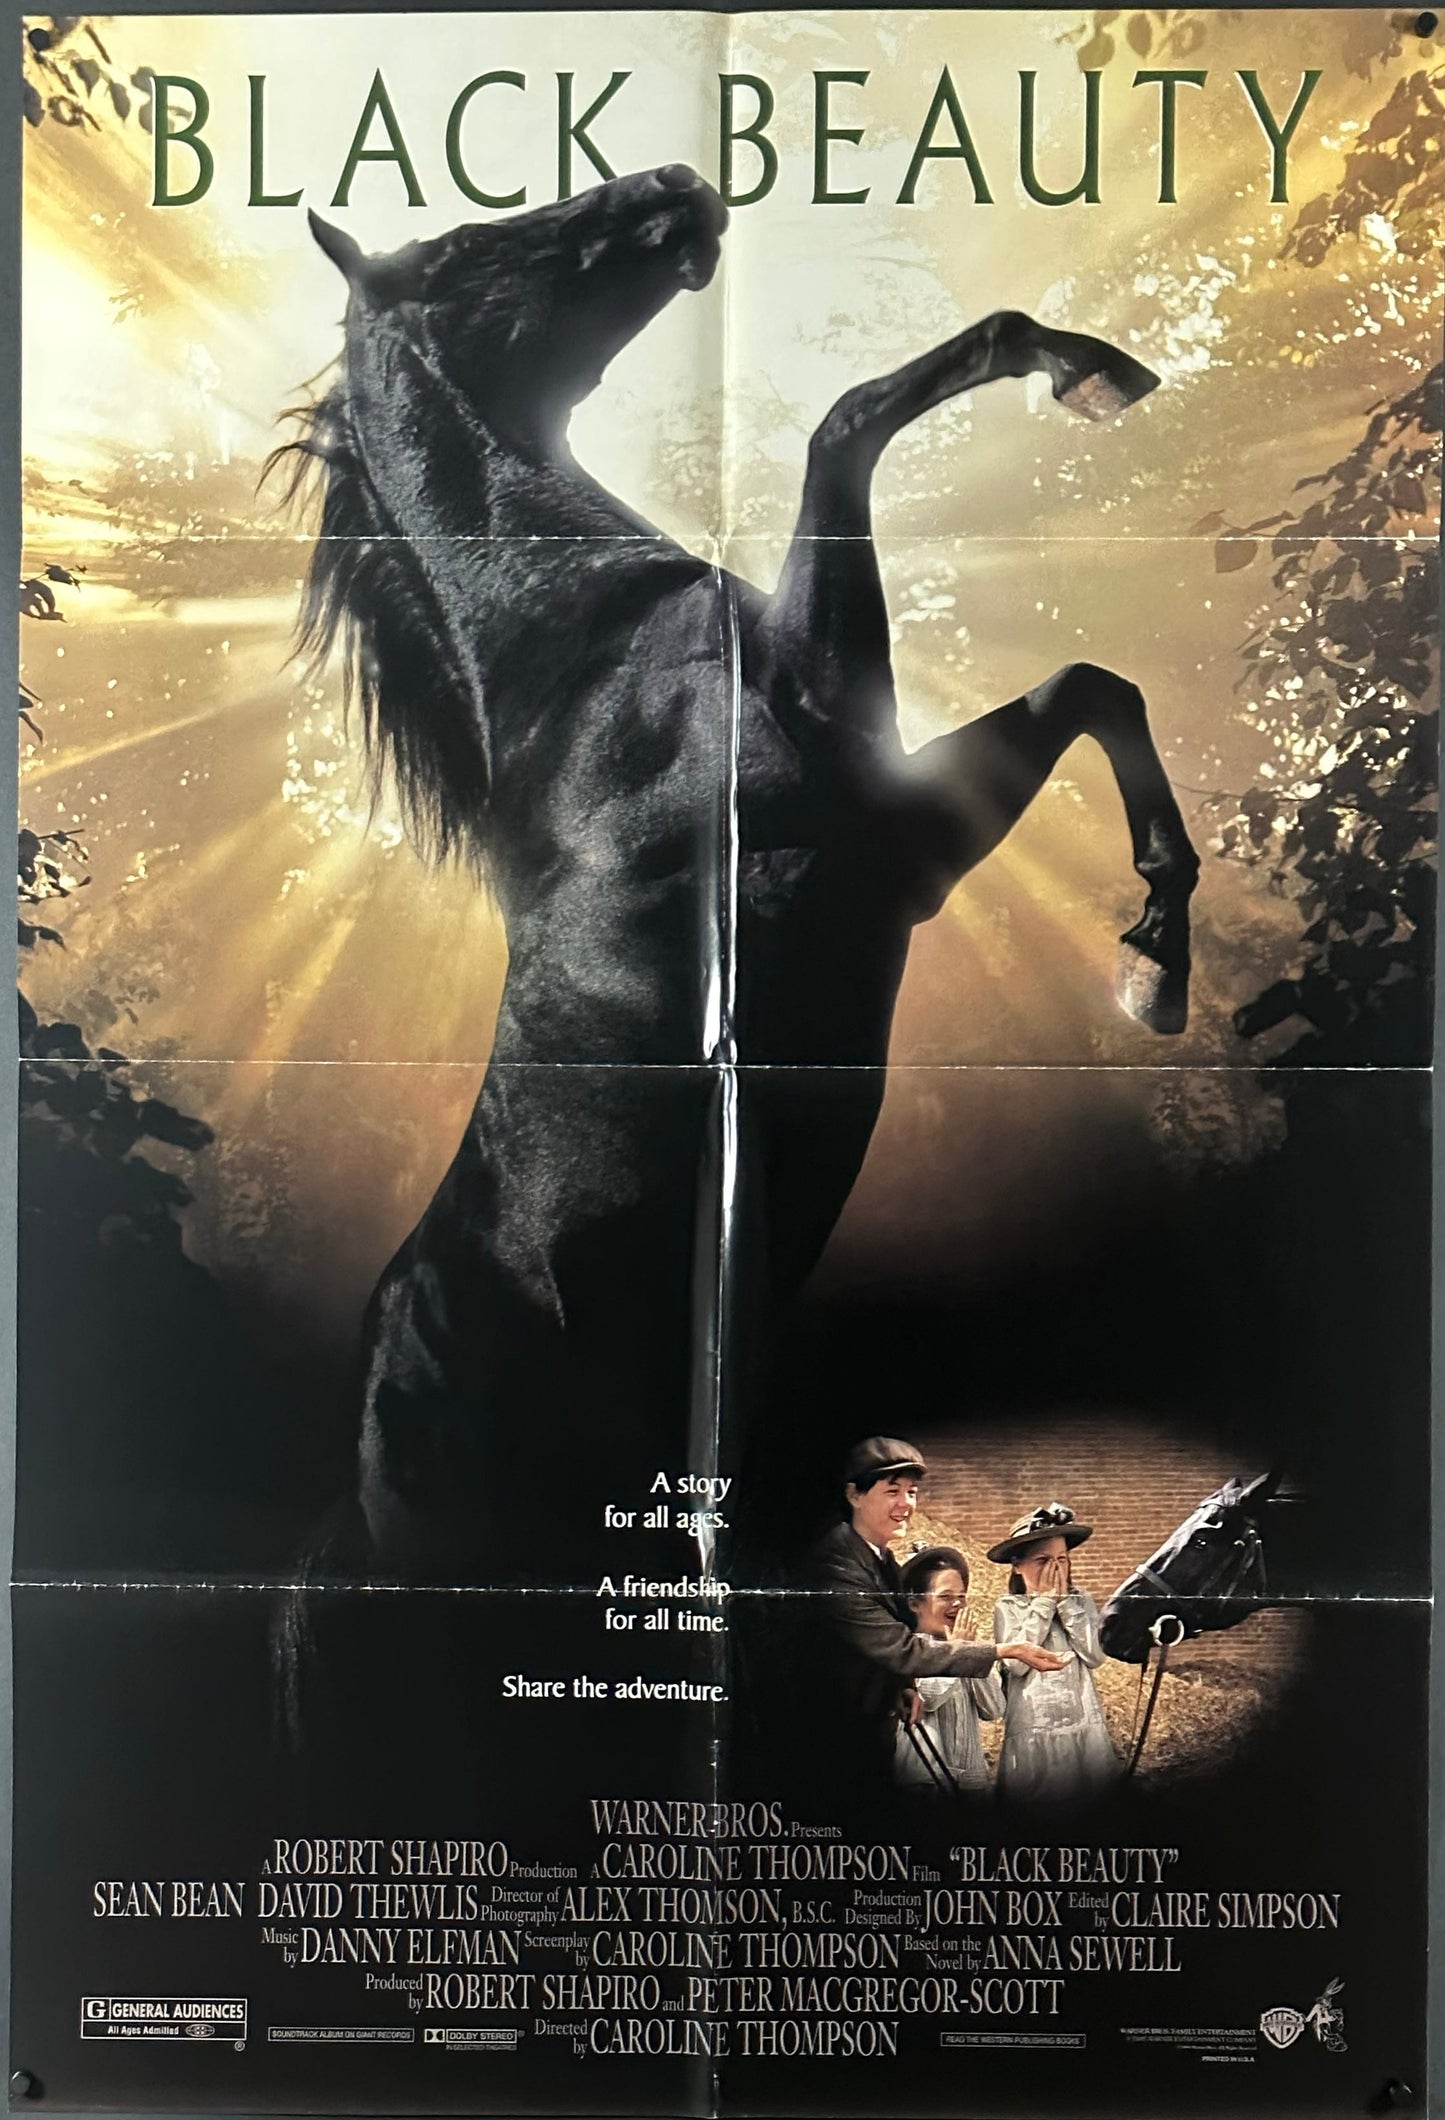 Black Beauty US One Sheet (1994) - ORIGINAL RELEASE - posterpalace.com